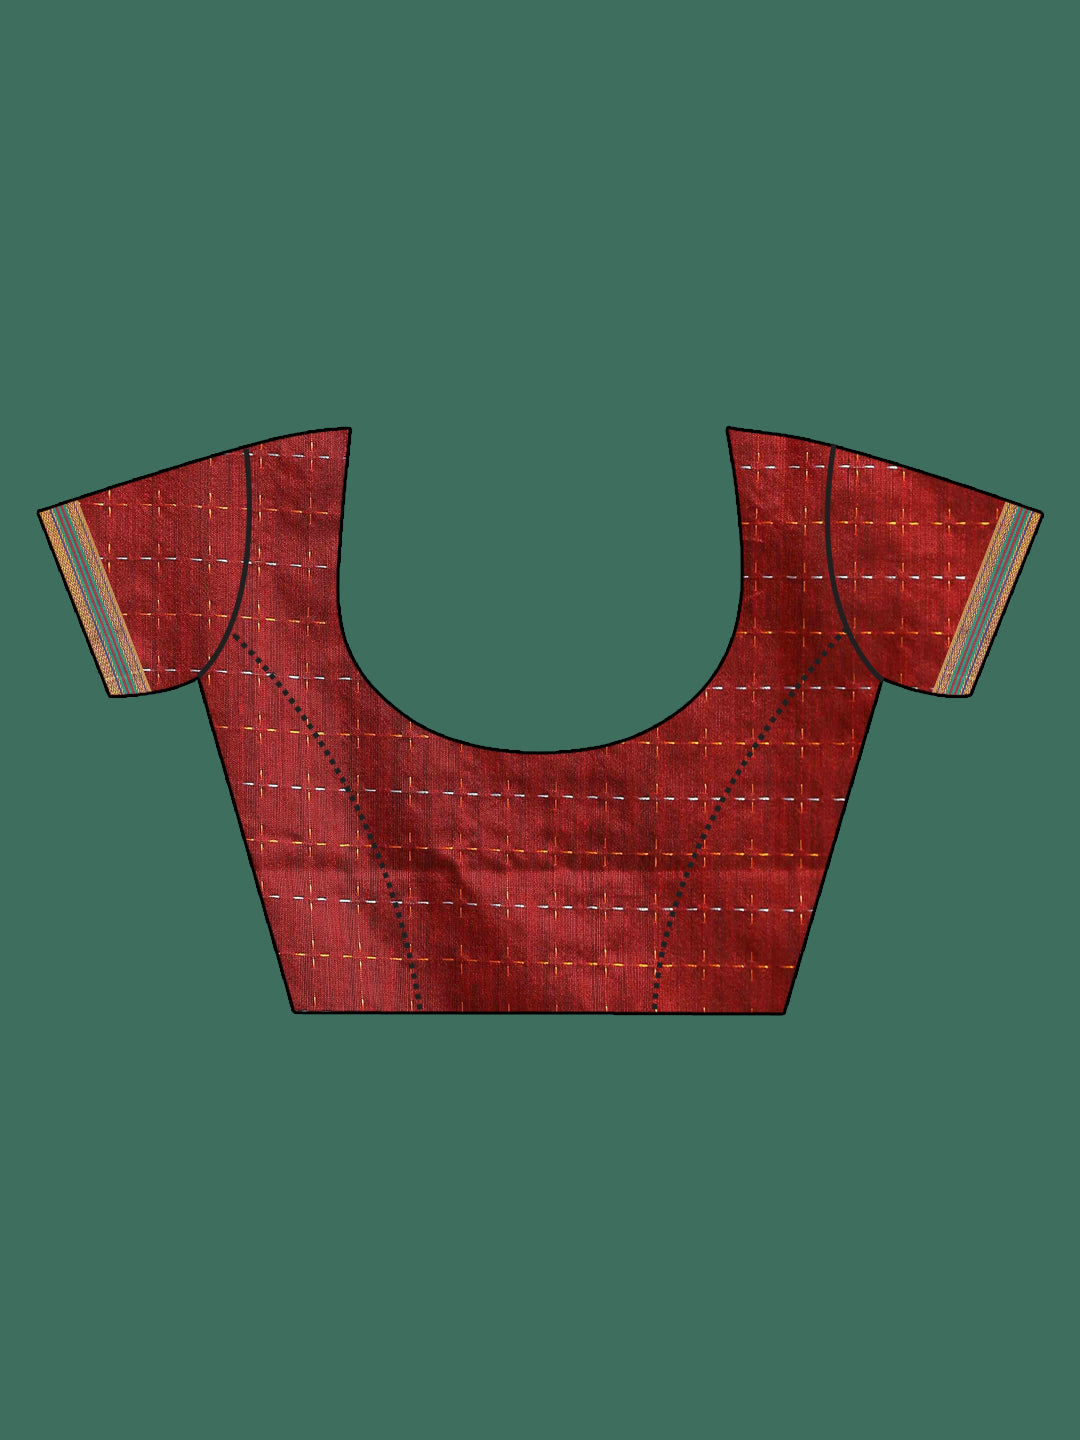 Indethnic Red Woven Design Saree - Blouse Piece View